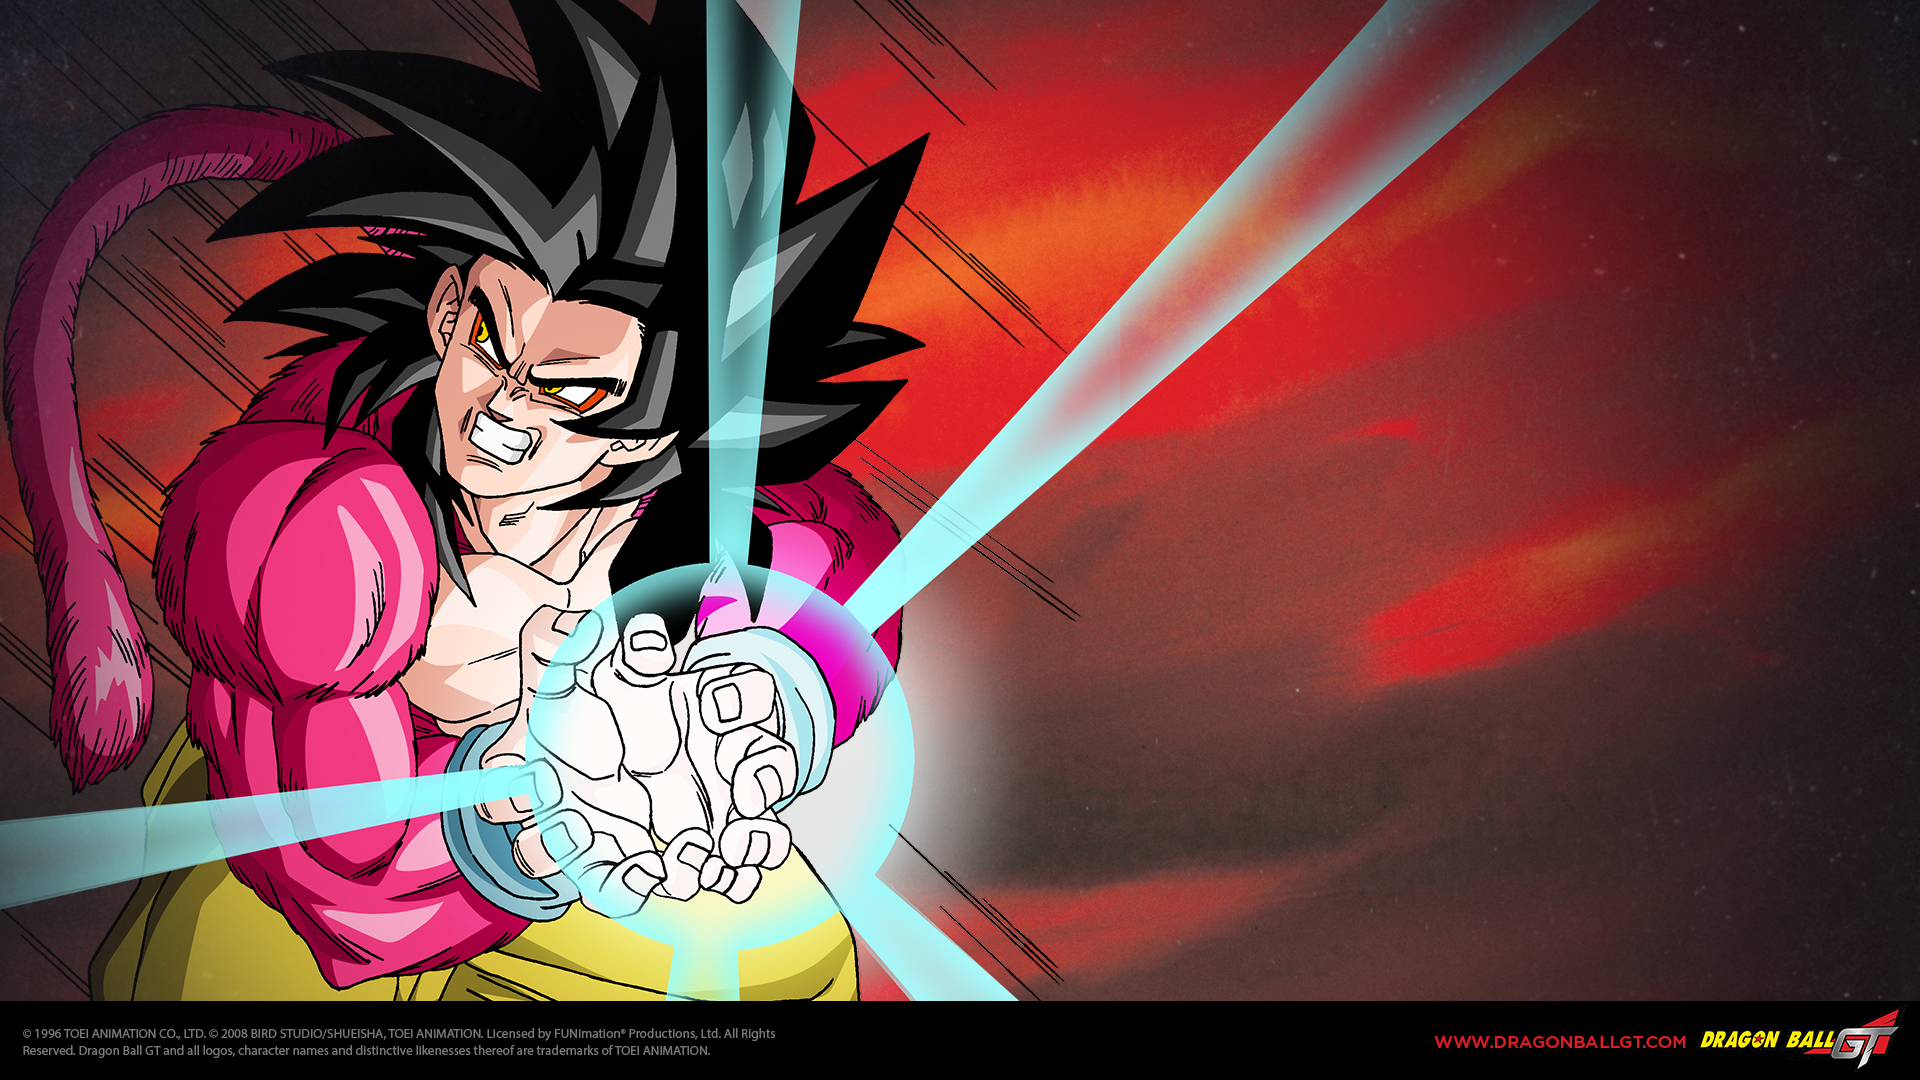 Free Download Dbgt Wallpapers 19x1080 For Your Desktop Mobile Tablet Explore 75 Dragonball Gt Wallpaper Dragon Ball Wallpaper Dragon Ball Z Kai Wallpaper Dragon Ball Z Wallpaper 19x1080